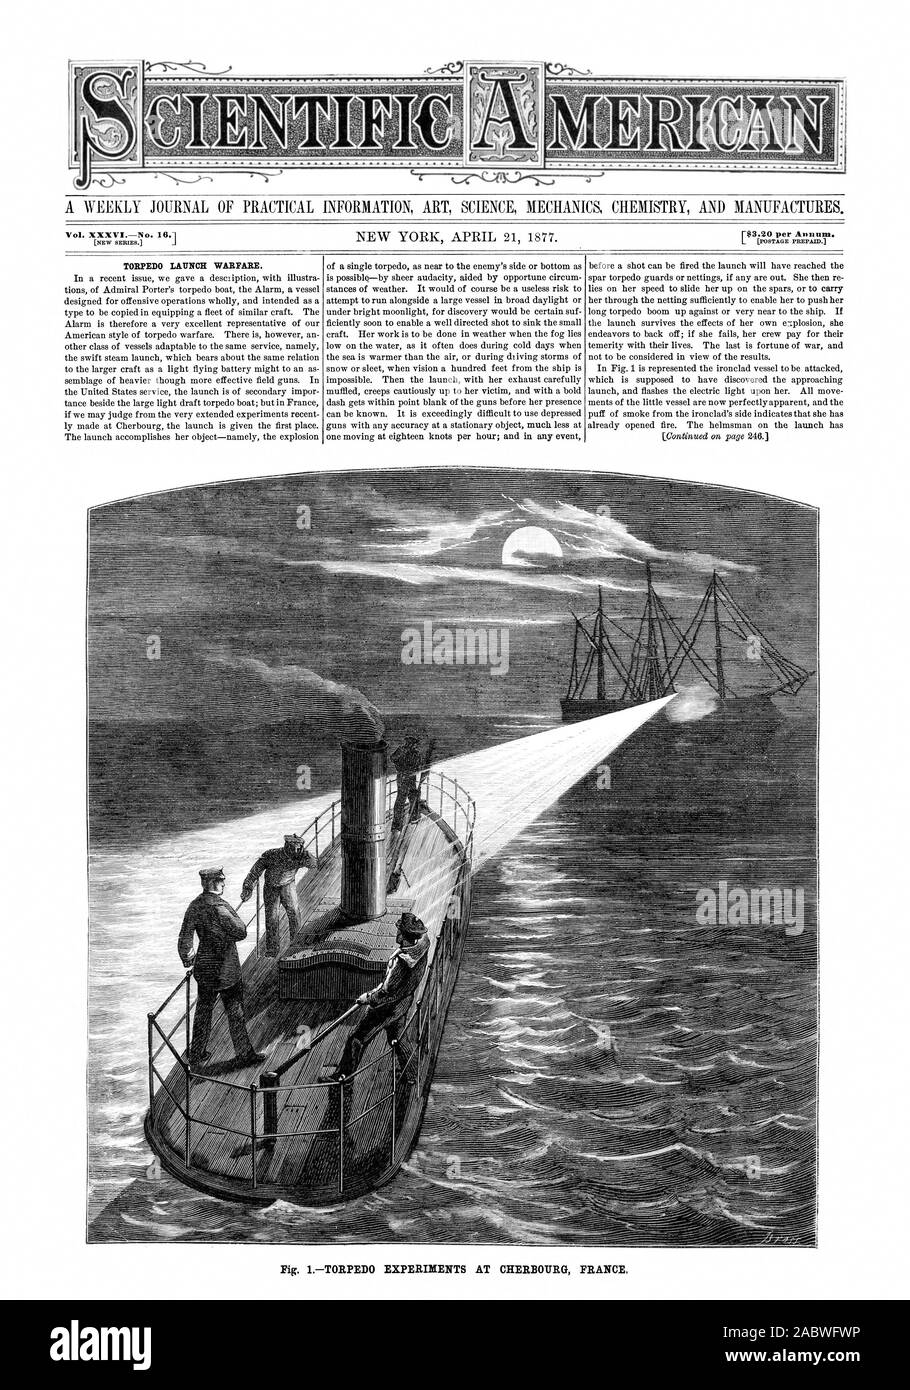 TORPEDO LAUNCH WARFARE Fig. ITORPEDO EXPERIMENTS AT CHERBOURG FRANCE, scientific american, 1877-04-21 Stock Photo